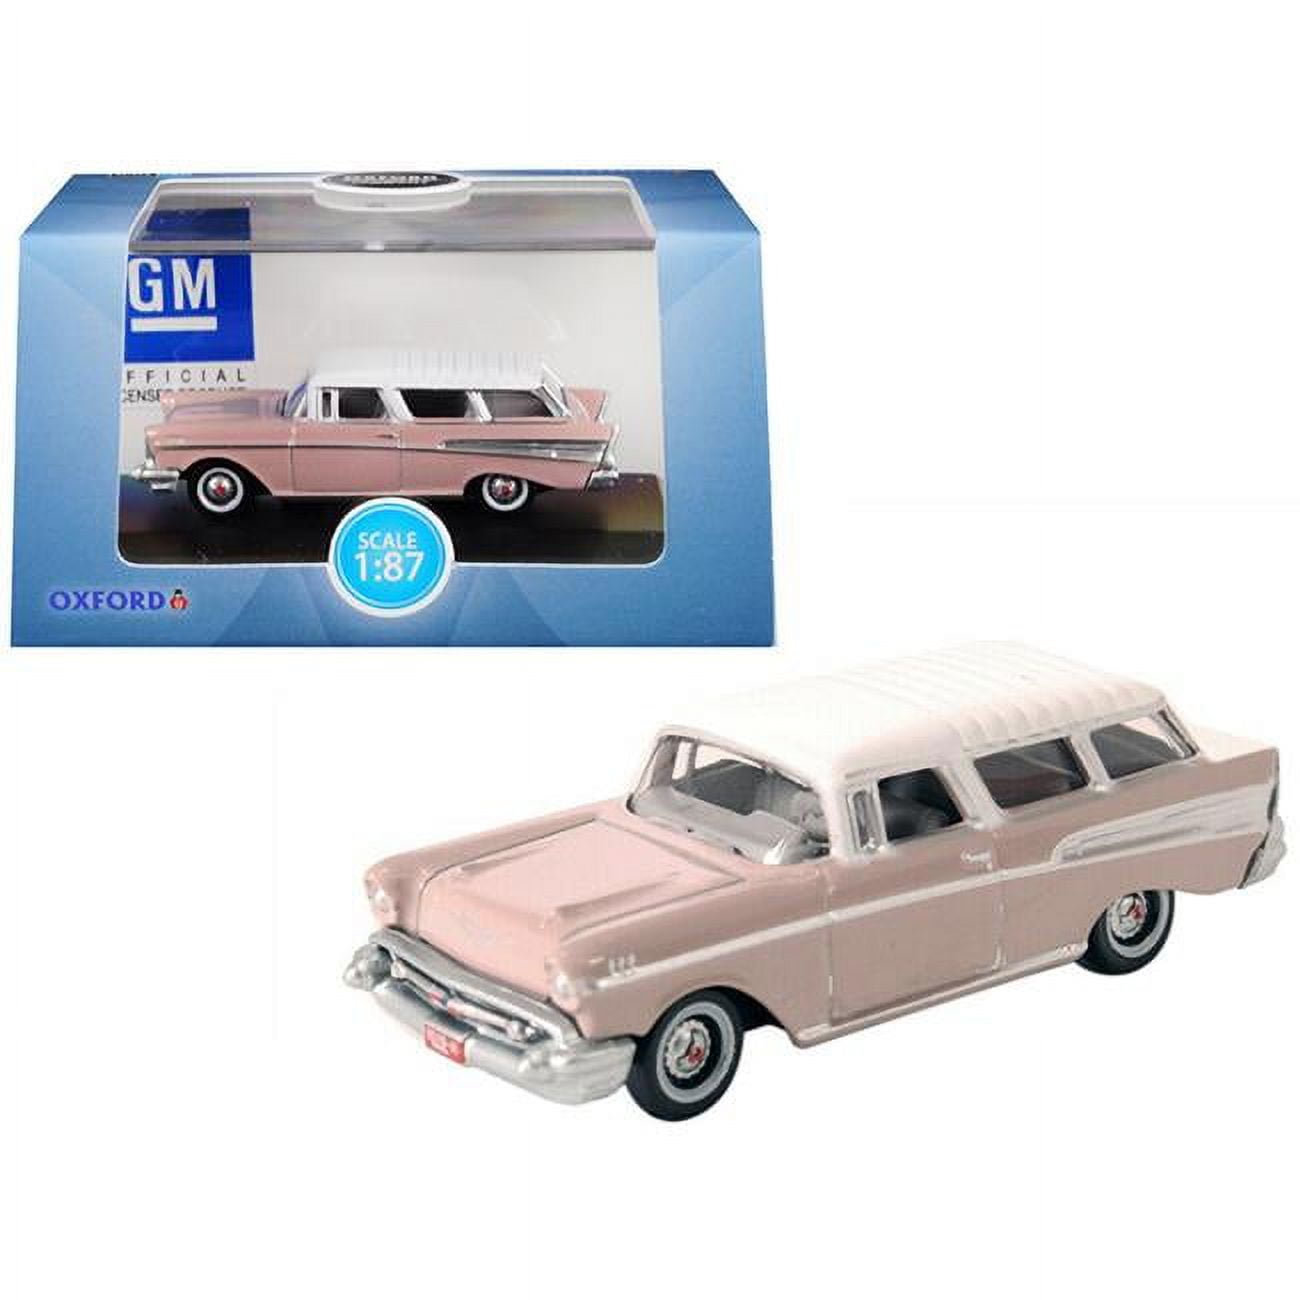 87cn57001 1957 Chevrolet Nomad Top 1 By 87 Ho Scale Diecast Model Car, Dusk Pearl & Imperial Ivory